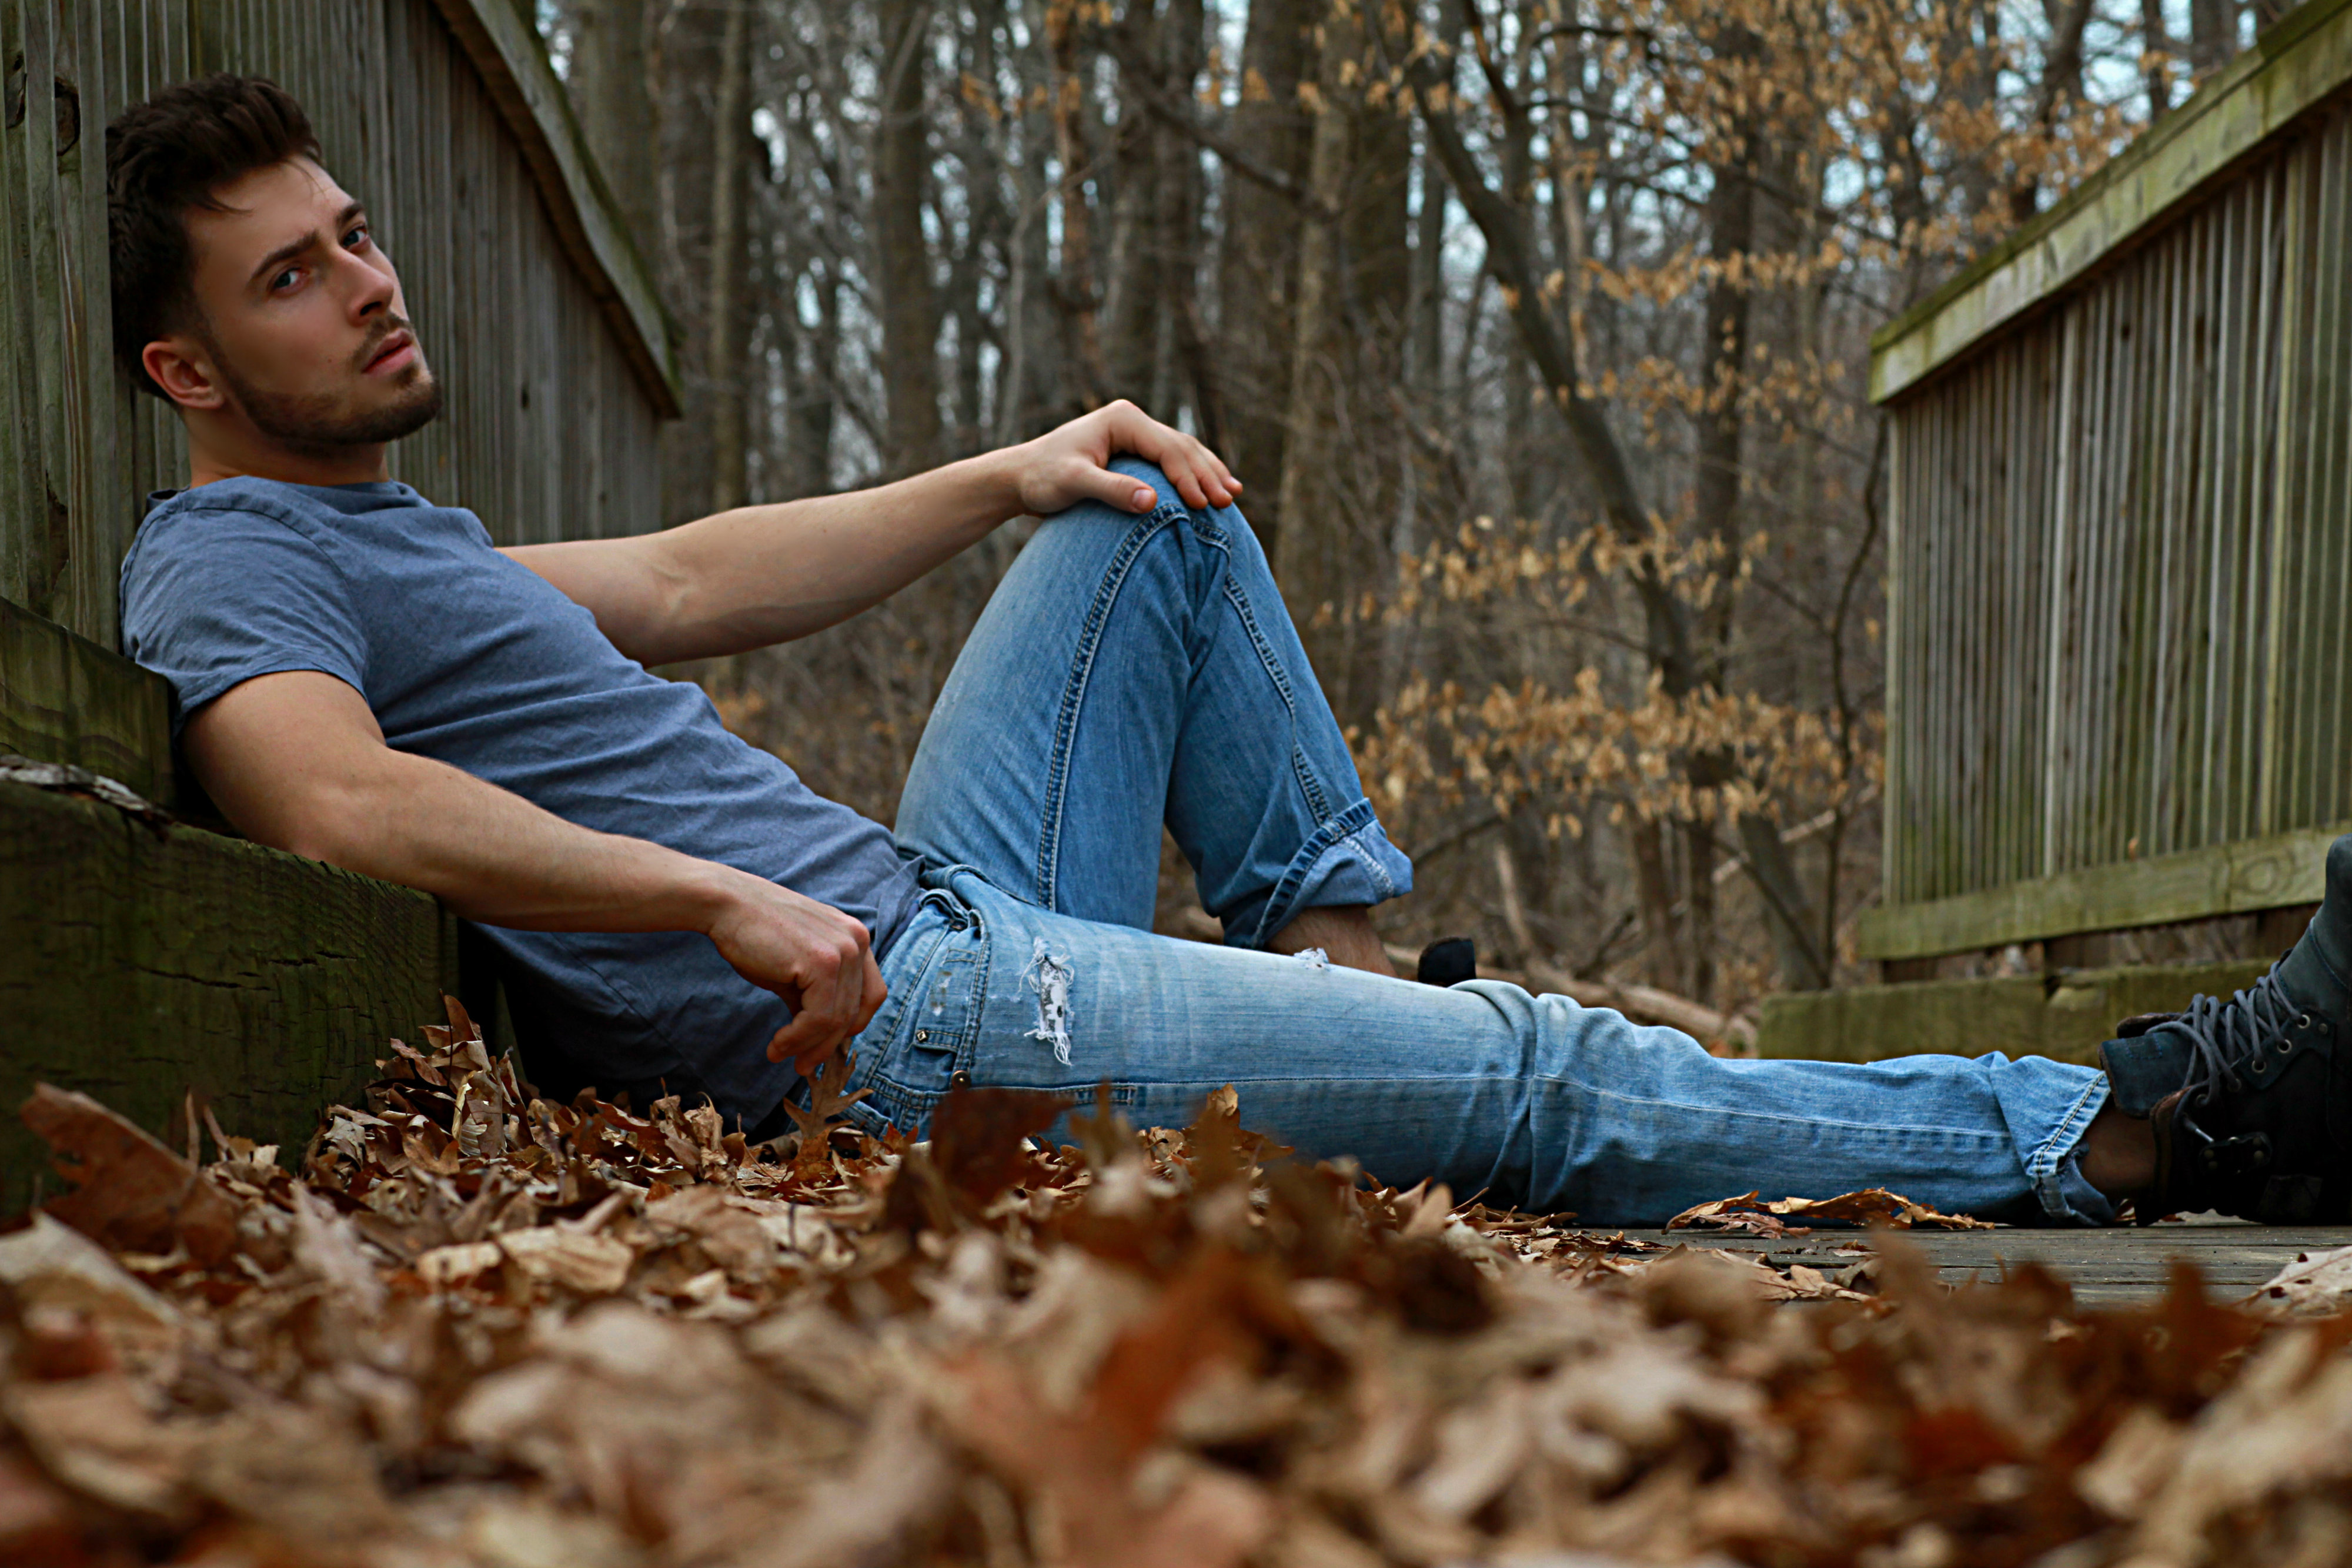 Image: Male, guy, face, lies, autumn, leaves, nature, relax, fencing